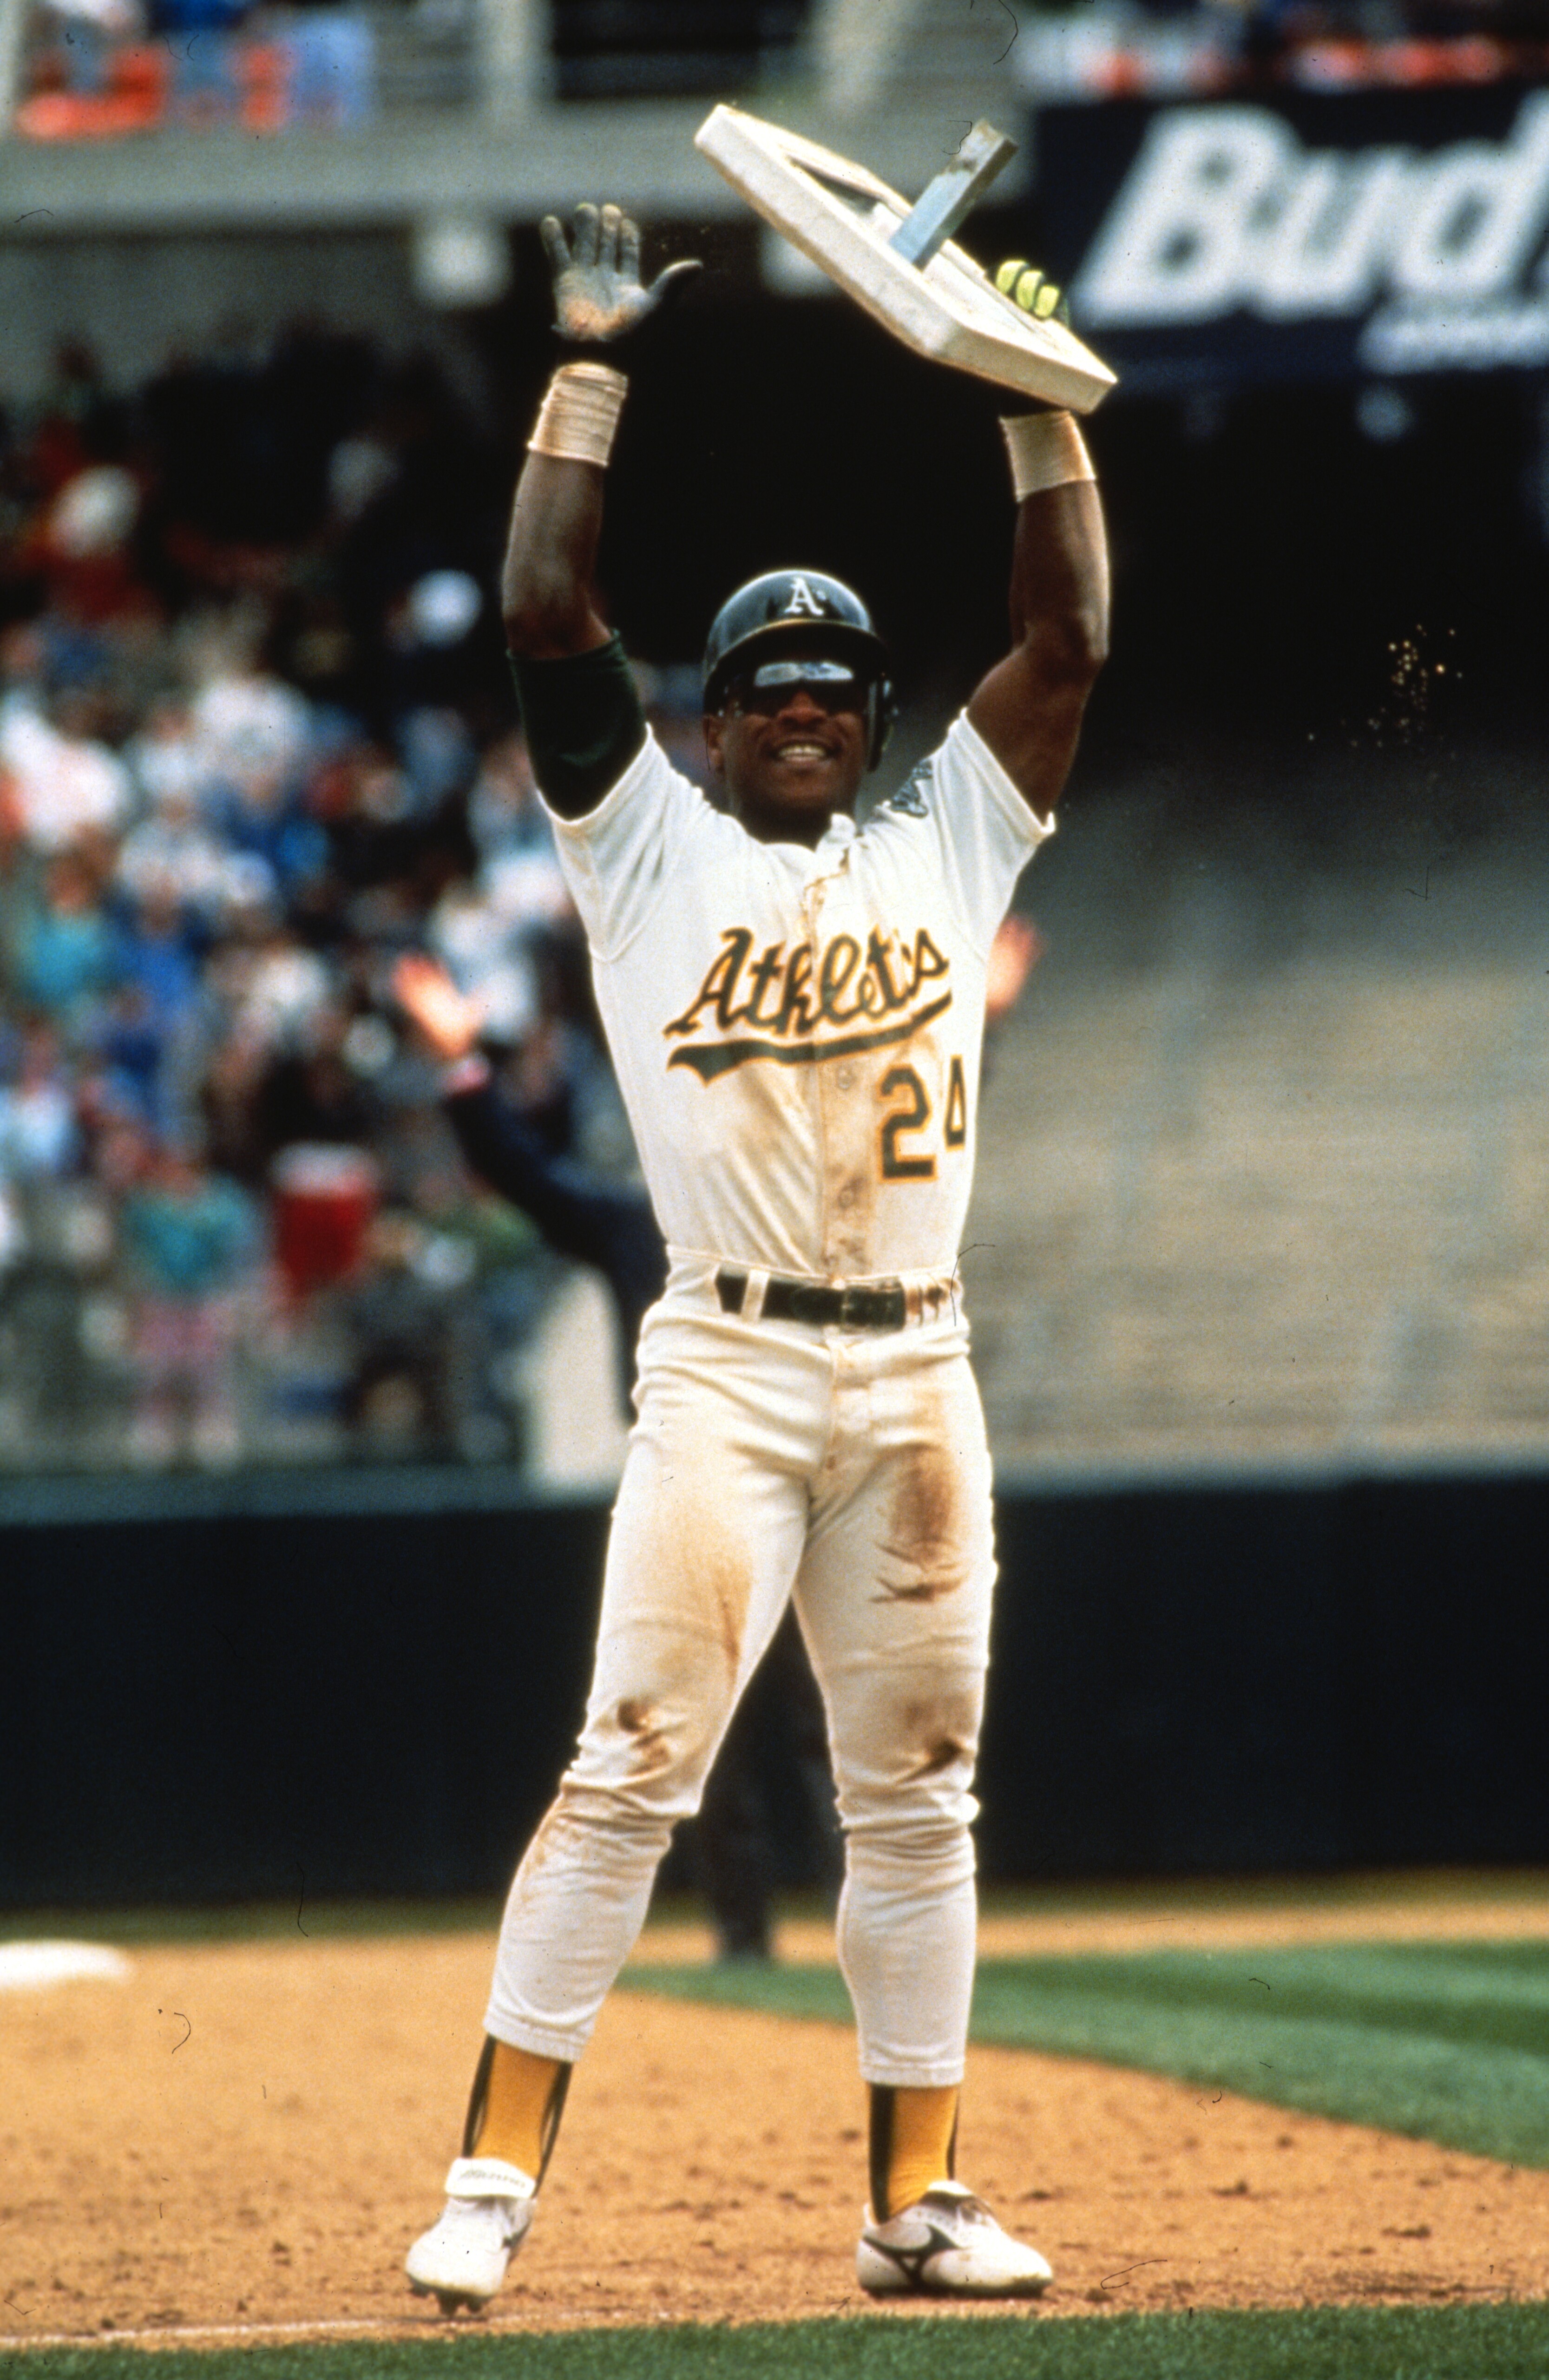 Who was the better overall player, Lou Brock or Rickey Henderson? - Quora